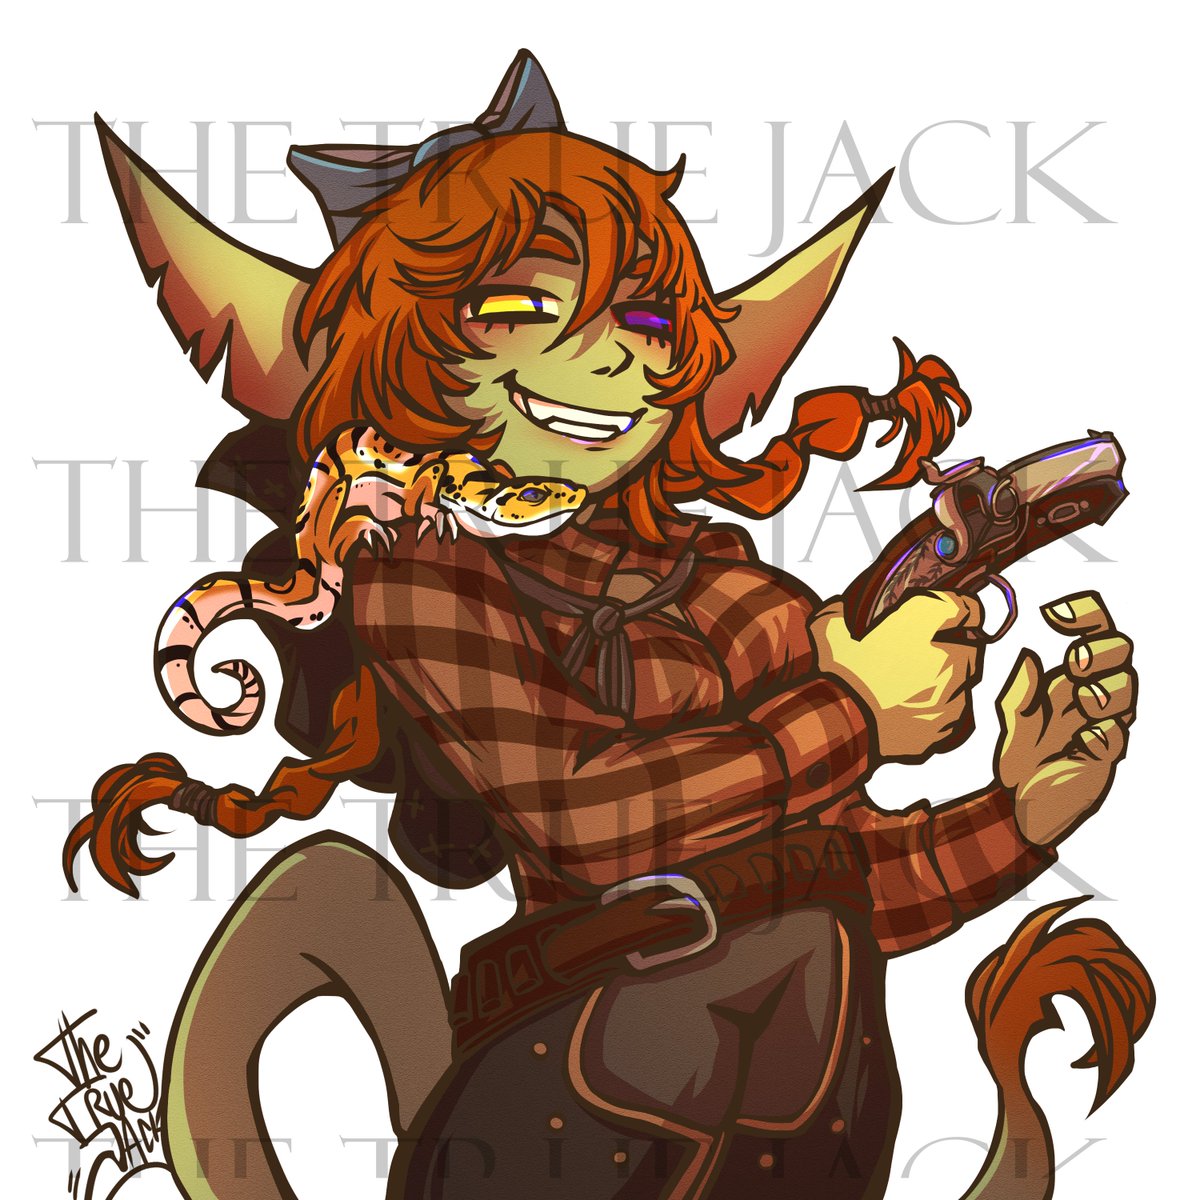 Artists and commissioners! Show me the best commission you've made/received! I want to see some pretty art of pretty ocs! Here's one of the lastest ones I made on Vgen! 🦎 to join the waitlist > vgen.co/TheTrueJack #DnDcharacter #VGenOpen